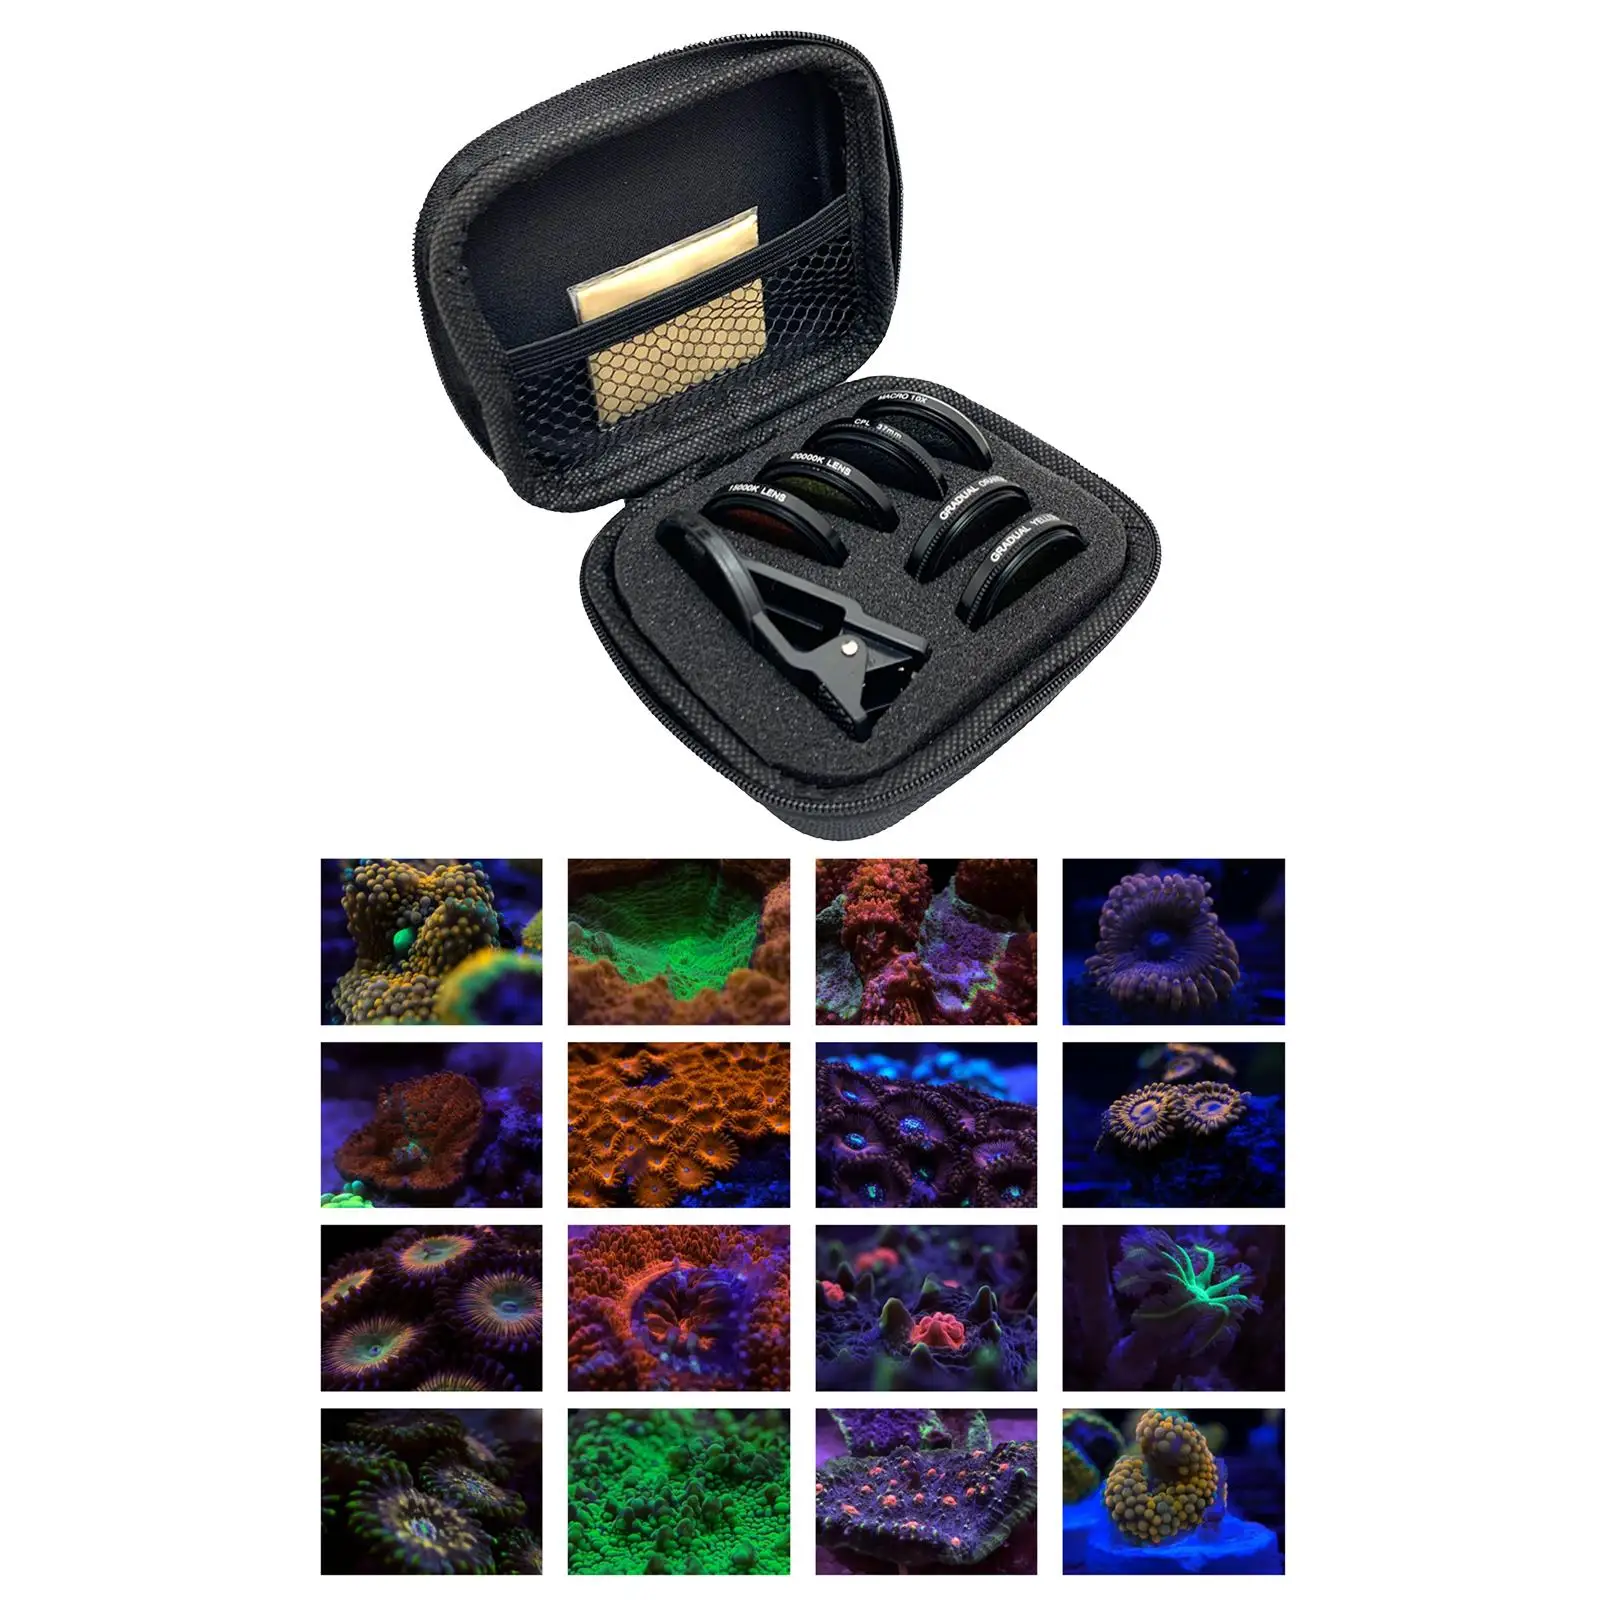 Smartphone Reef Coral Lens Filter Kits for Phone Professional Photography